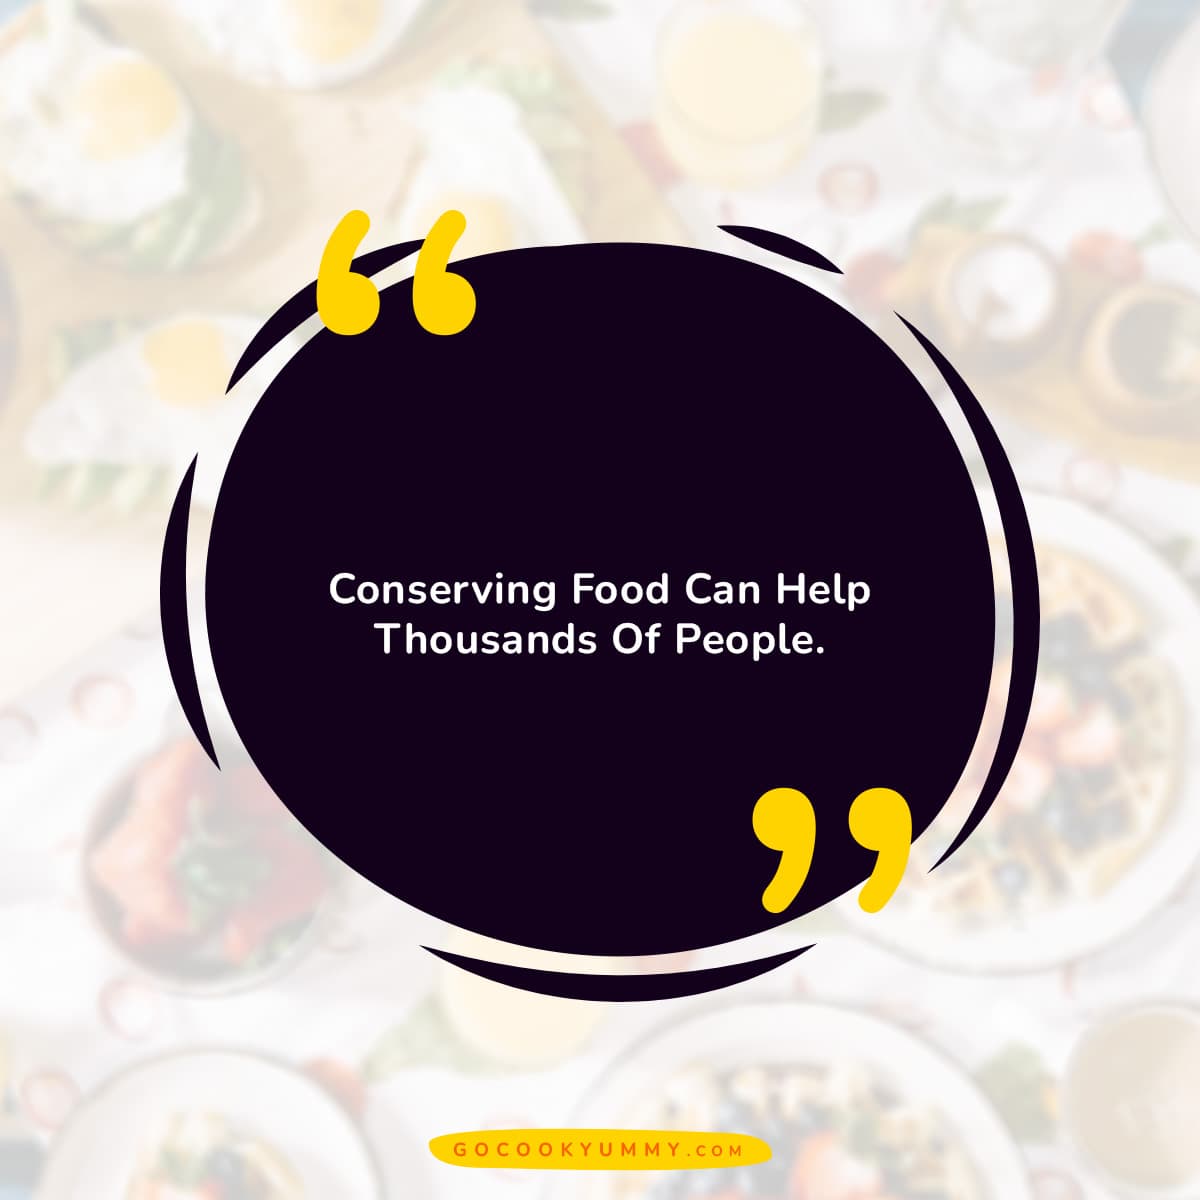 Conserving food can help thousands of people.